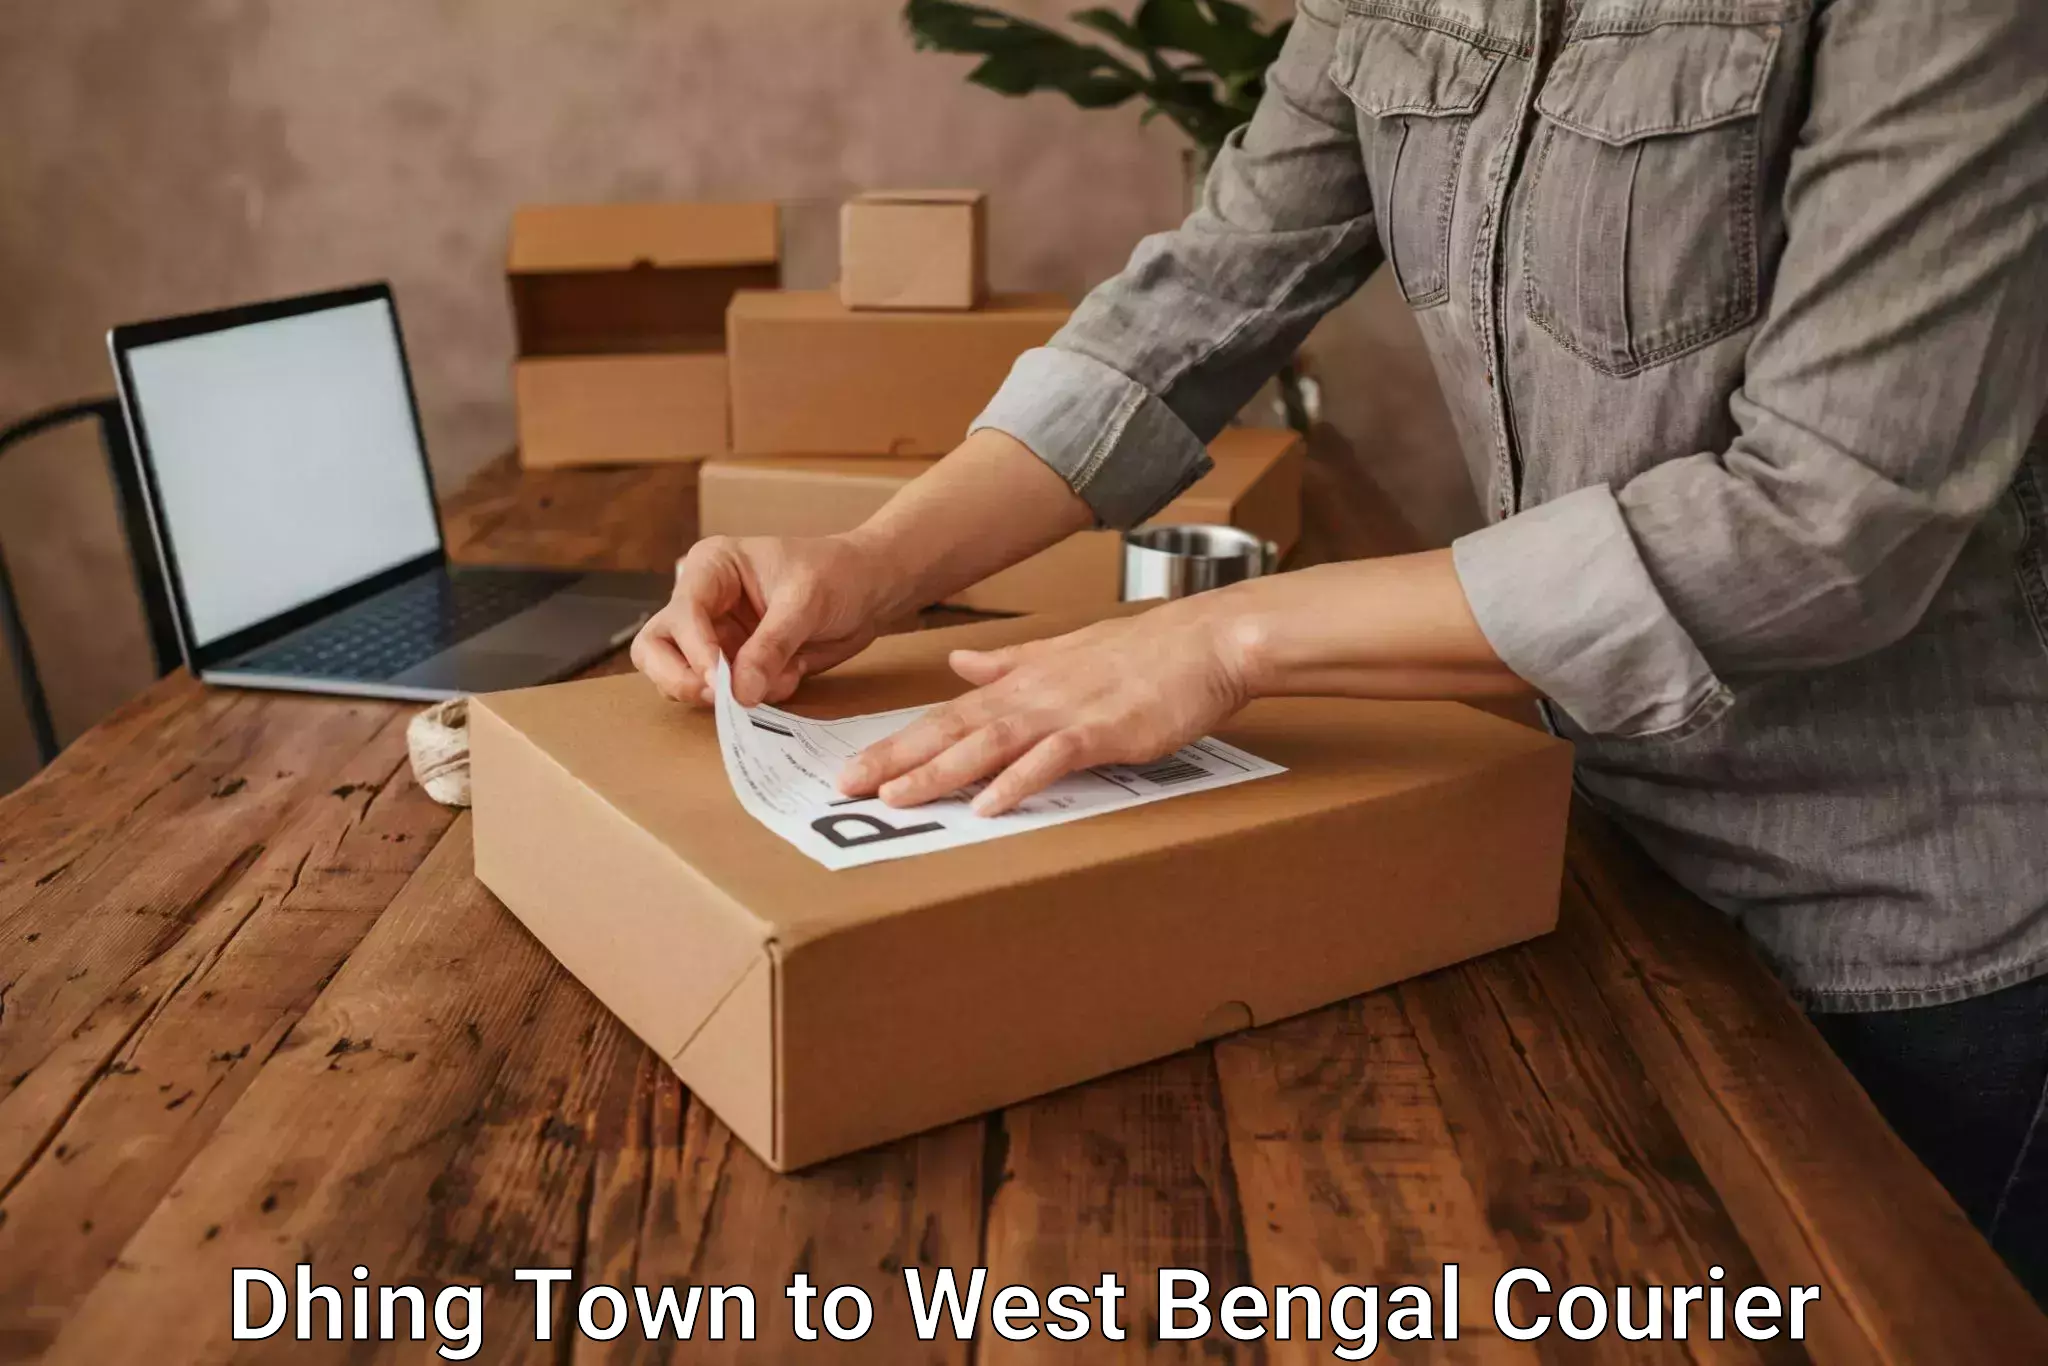 Courier service innovation Dhing Town to Kolkata Port